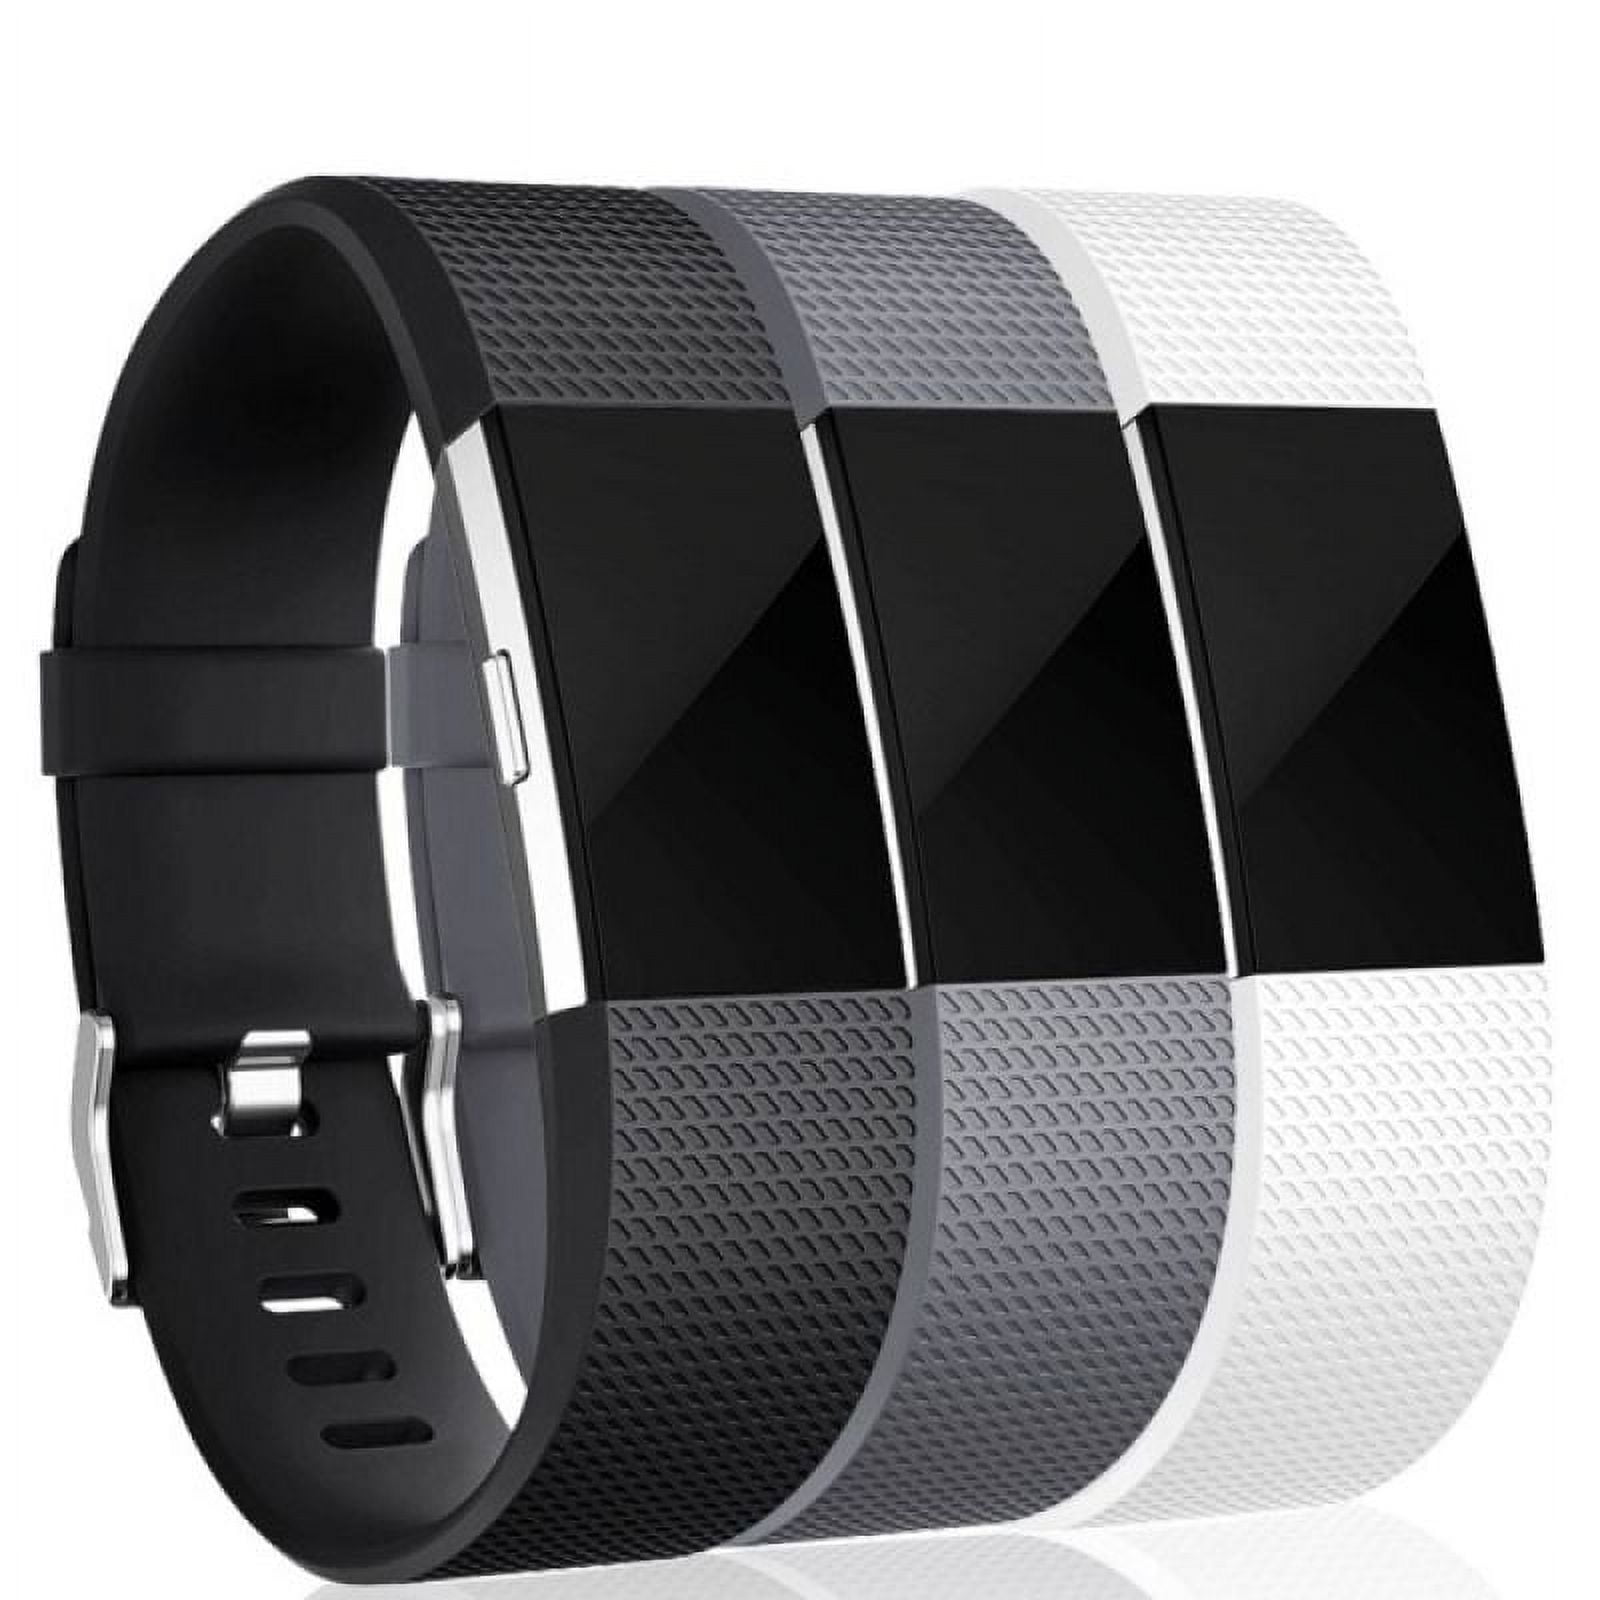 Bracelet silicone Fitbit Charge 2 - bleu gris - Dimensions: Taille S